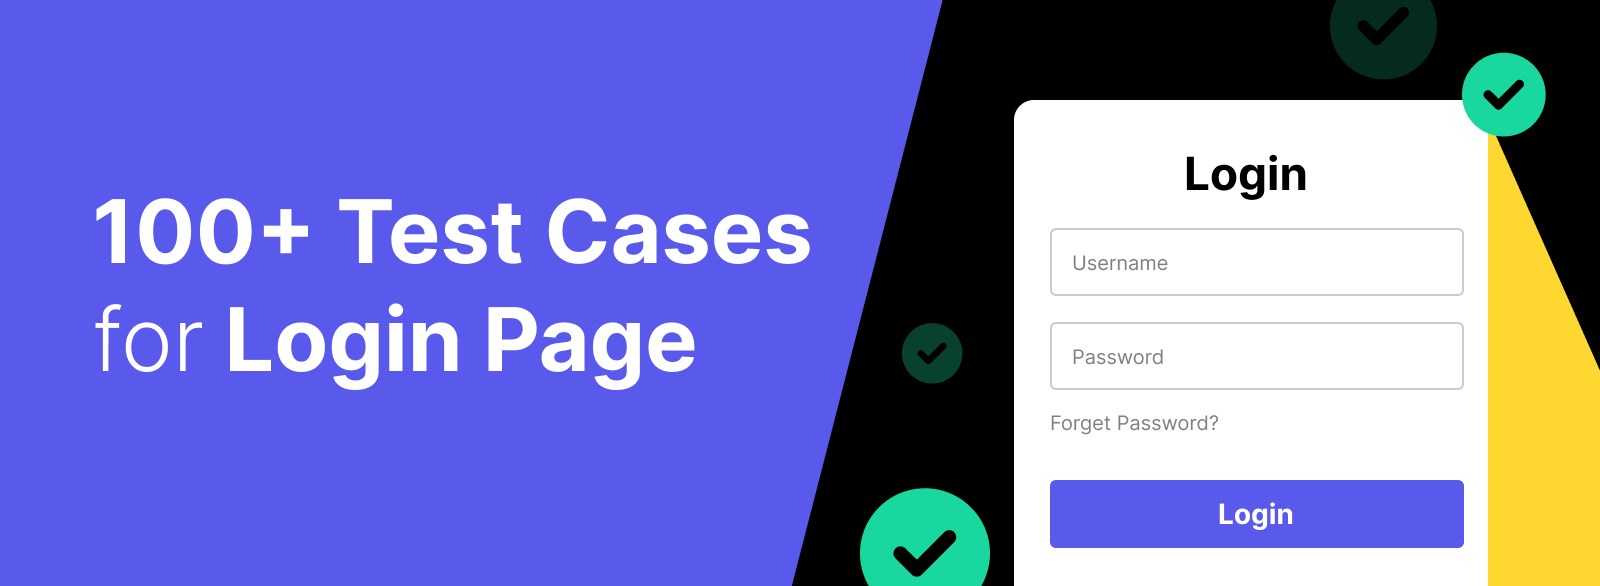 100 test cases for login page your team need